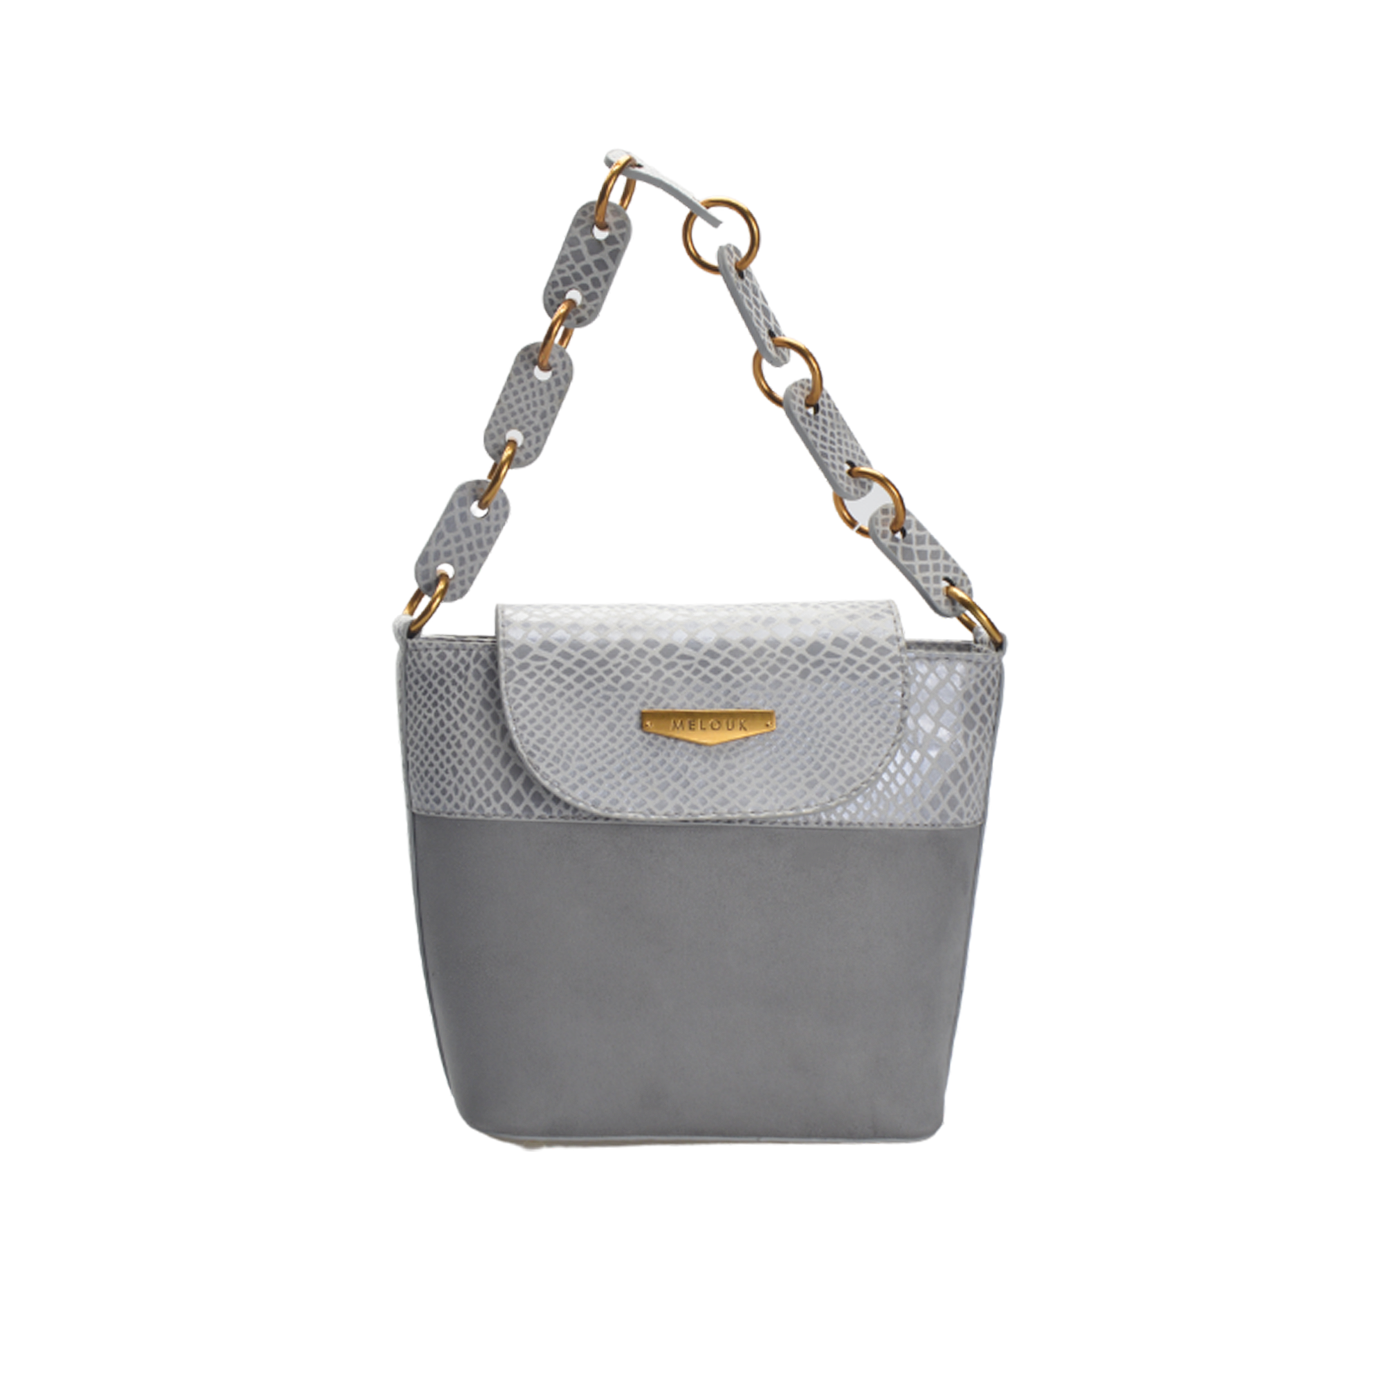 Gray Embossed Leather Shoulder Bag With Buckle